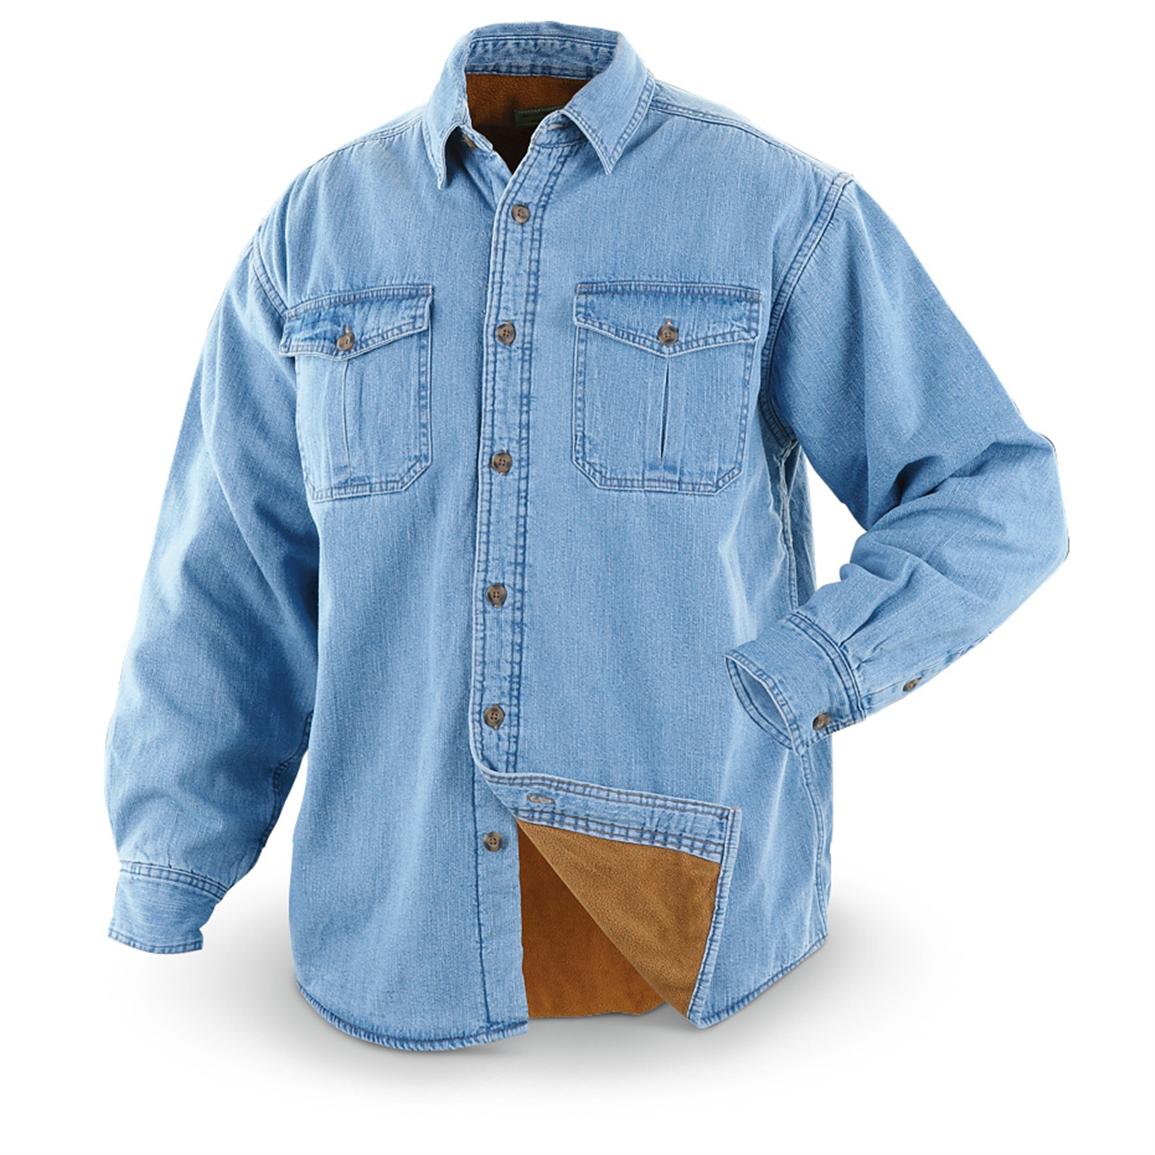 Rugged Earth Fleece-lined Denim Shirt - 589011, Shirts at Sportsman's Guide